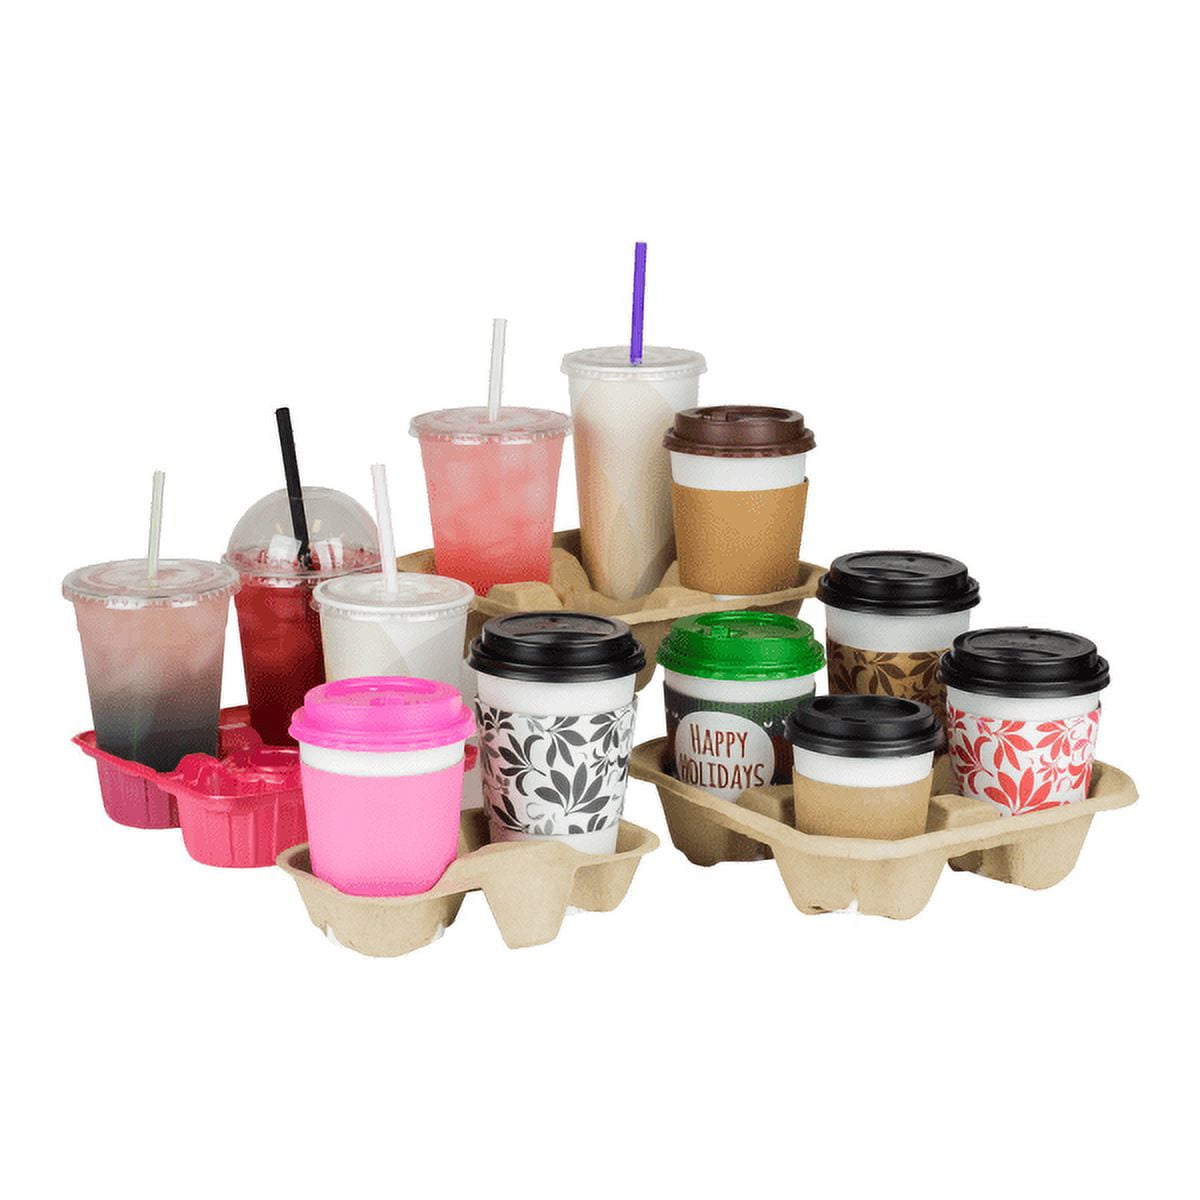 Shop Coffee Sleeves - Traditional Cup Jackets - Pink - 1,000 ct at Low Price